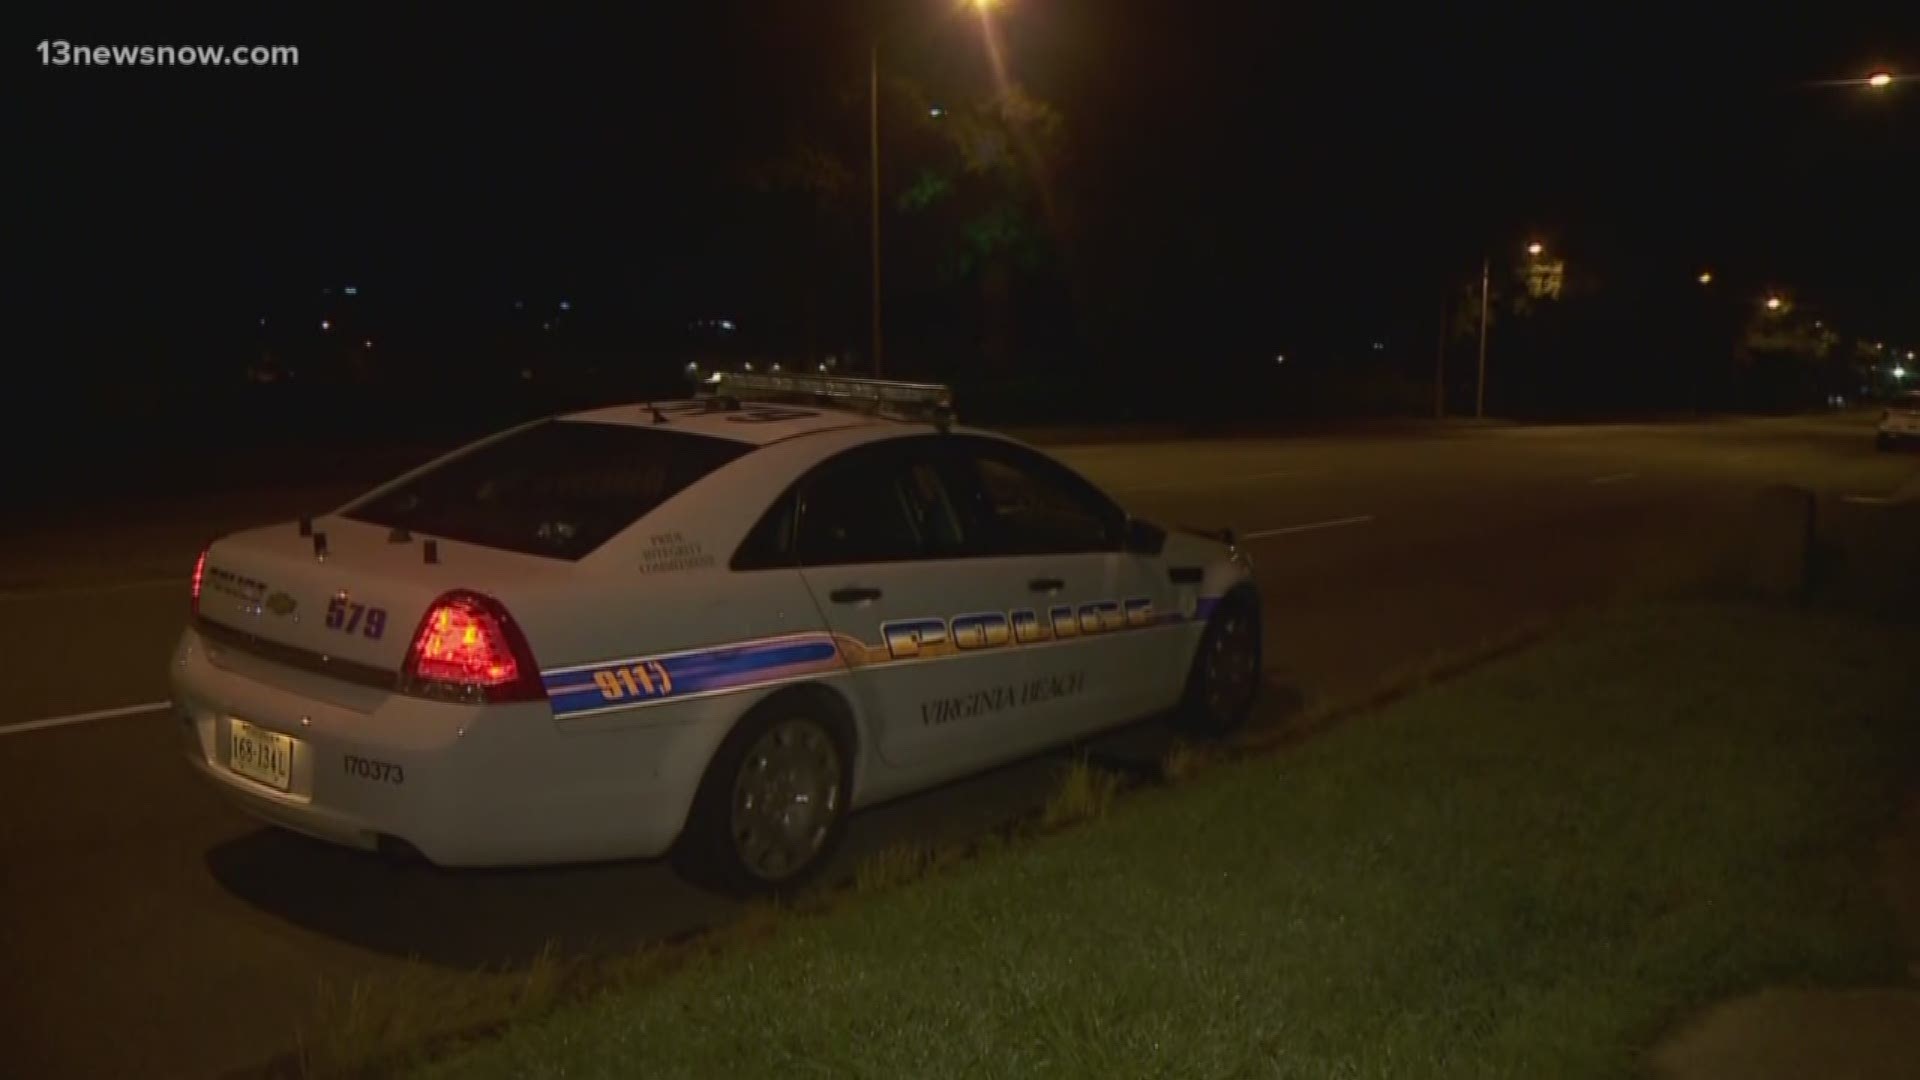 Officers are searching for a suspect after a pursuit that started at 2 a.m. in Virginia Beach.